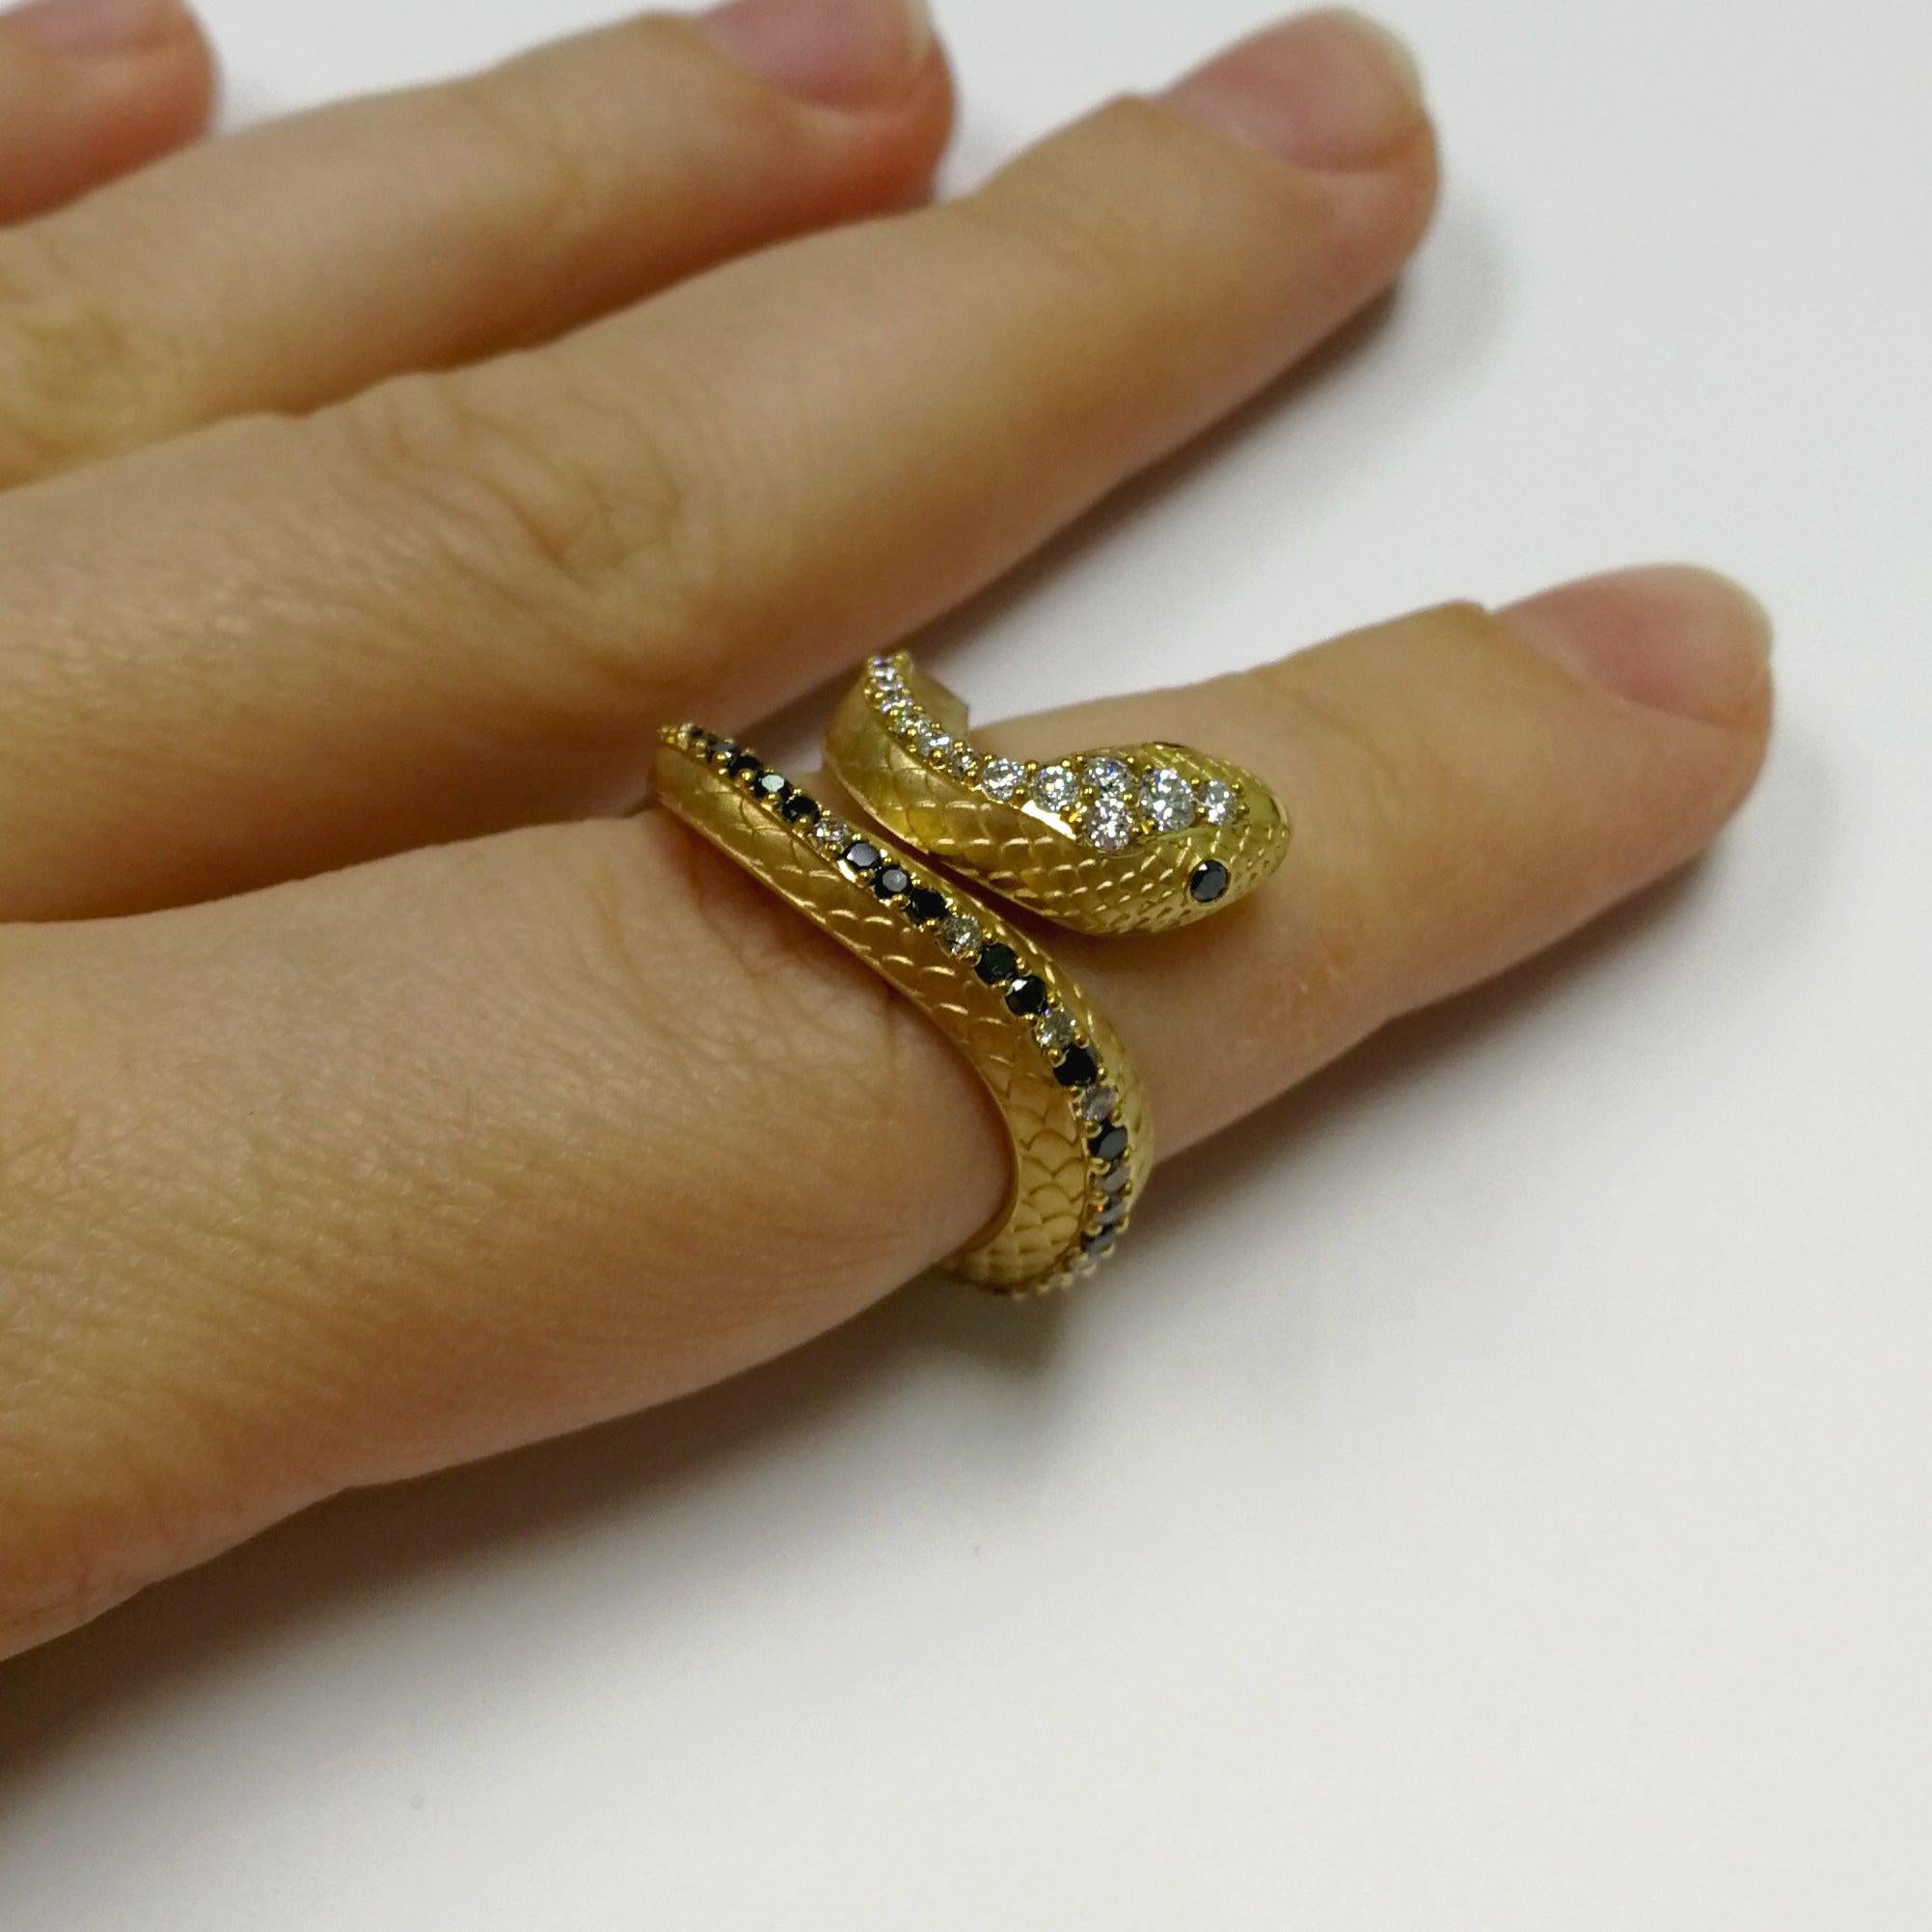 For Sale:  White, Champagne and Black Diamonds 18 Karat Yellow Gold Snake Ring 8